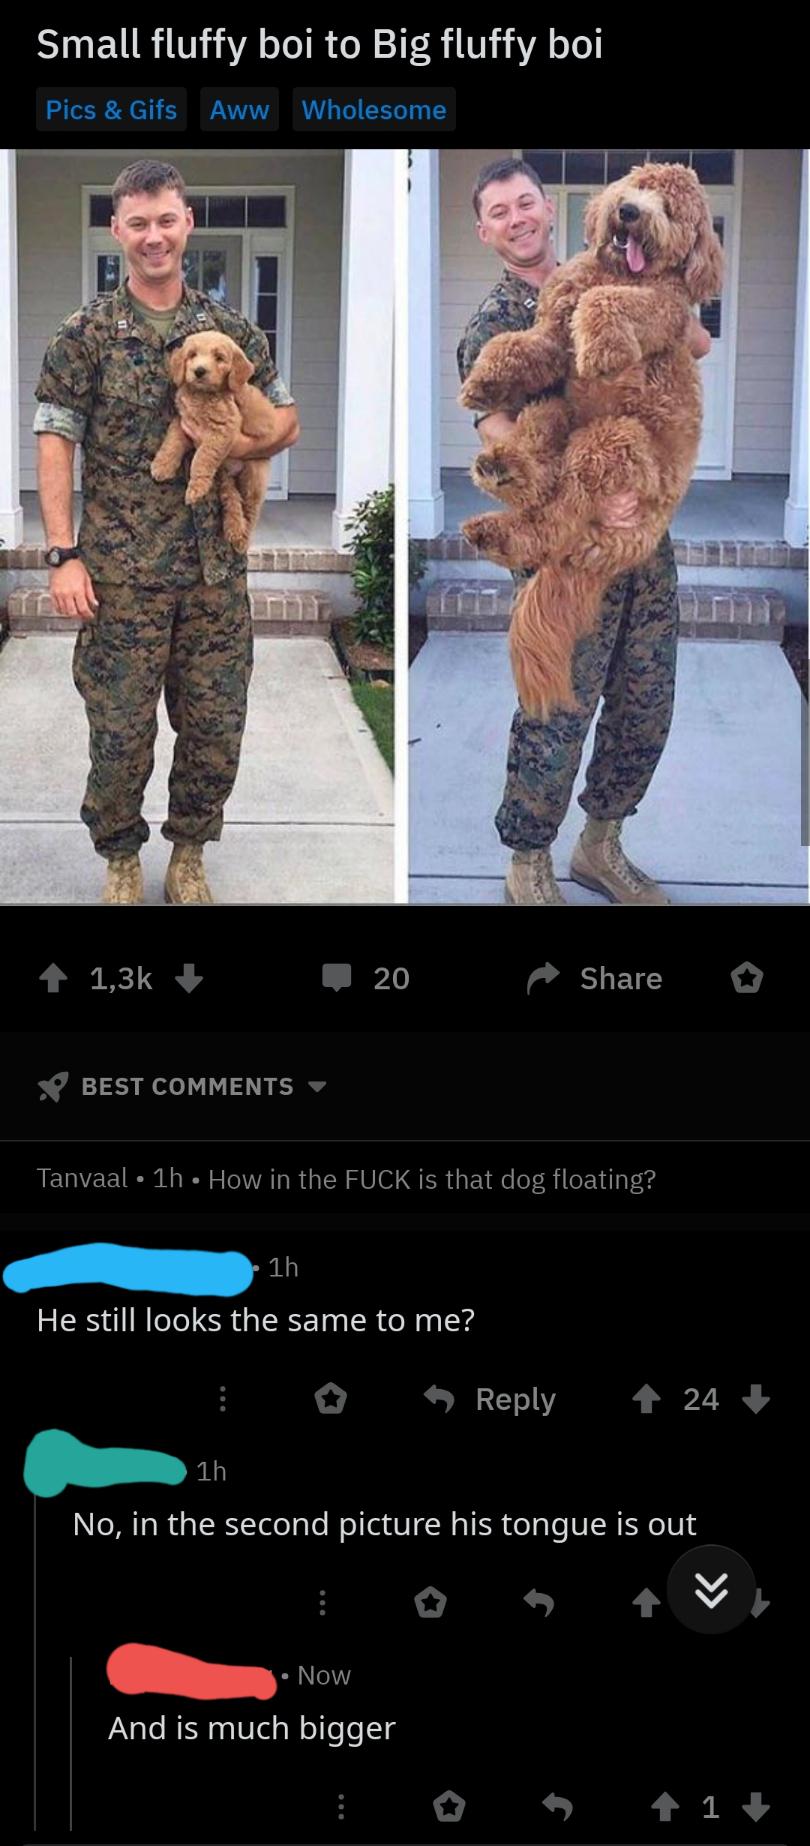 before and after deployment - Small fluffy boi to Big fluffy boi Pics & Gifs Aww Wholesome 20 V Best Tanvaal 1h How in the Fuck is that dog floating? 1h He still looks the same to me? 24 1h No, in the second picture his tongue is out Now And is much bigge